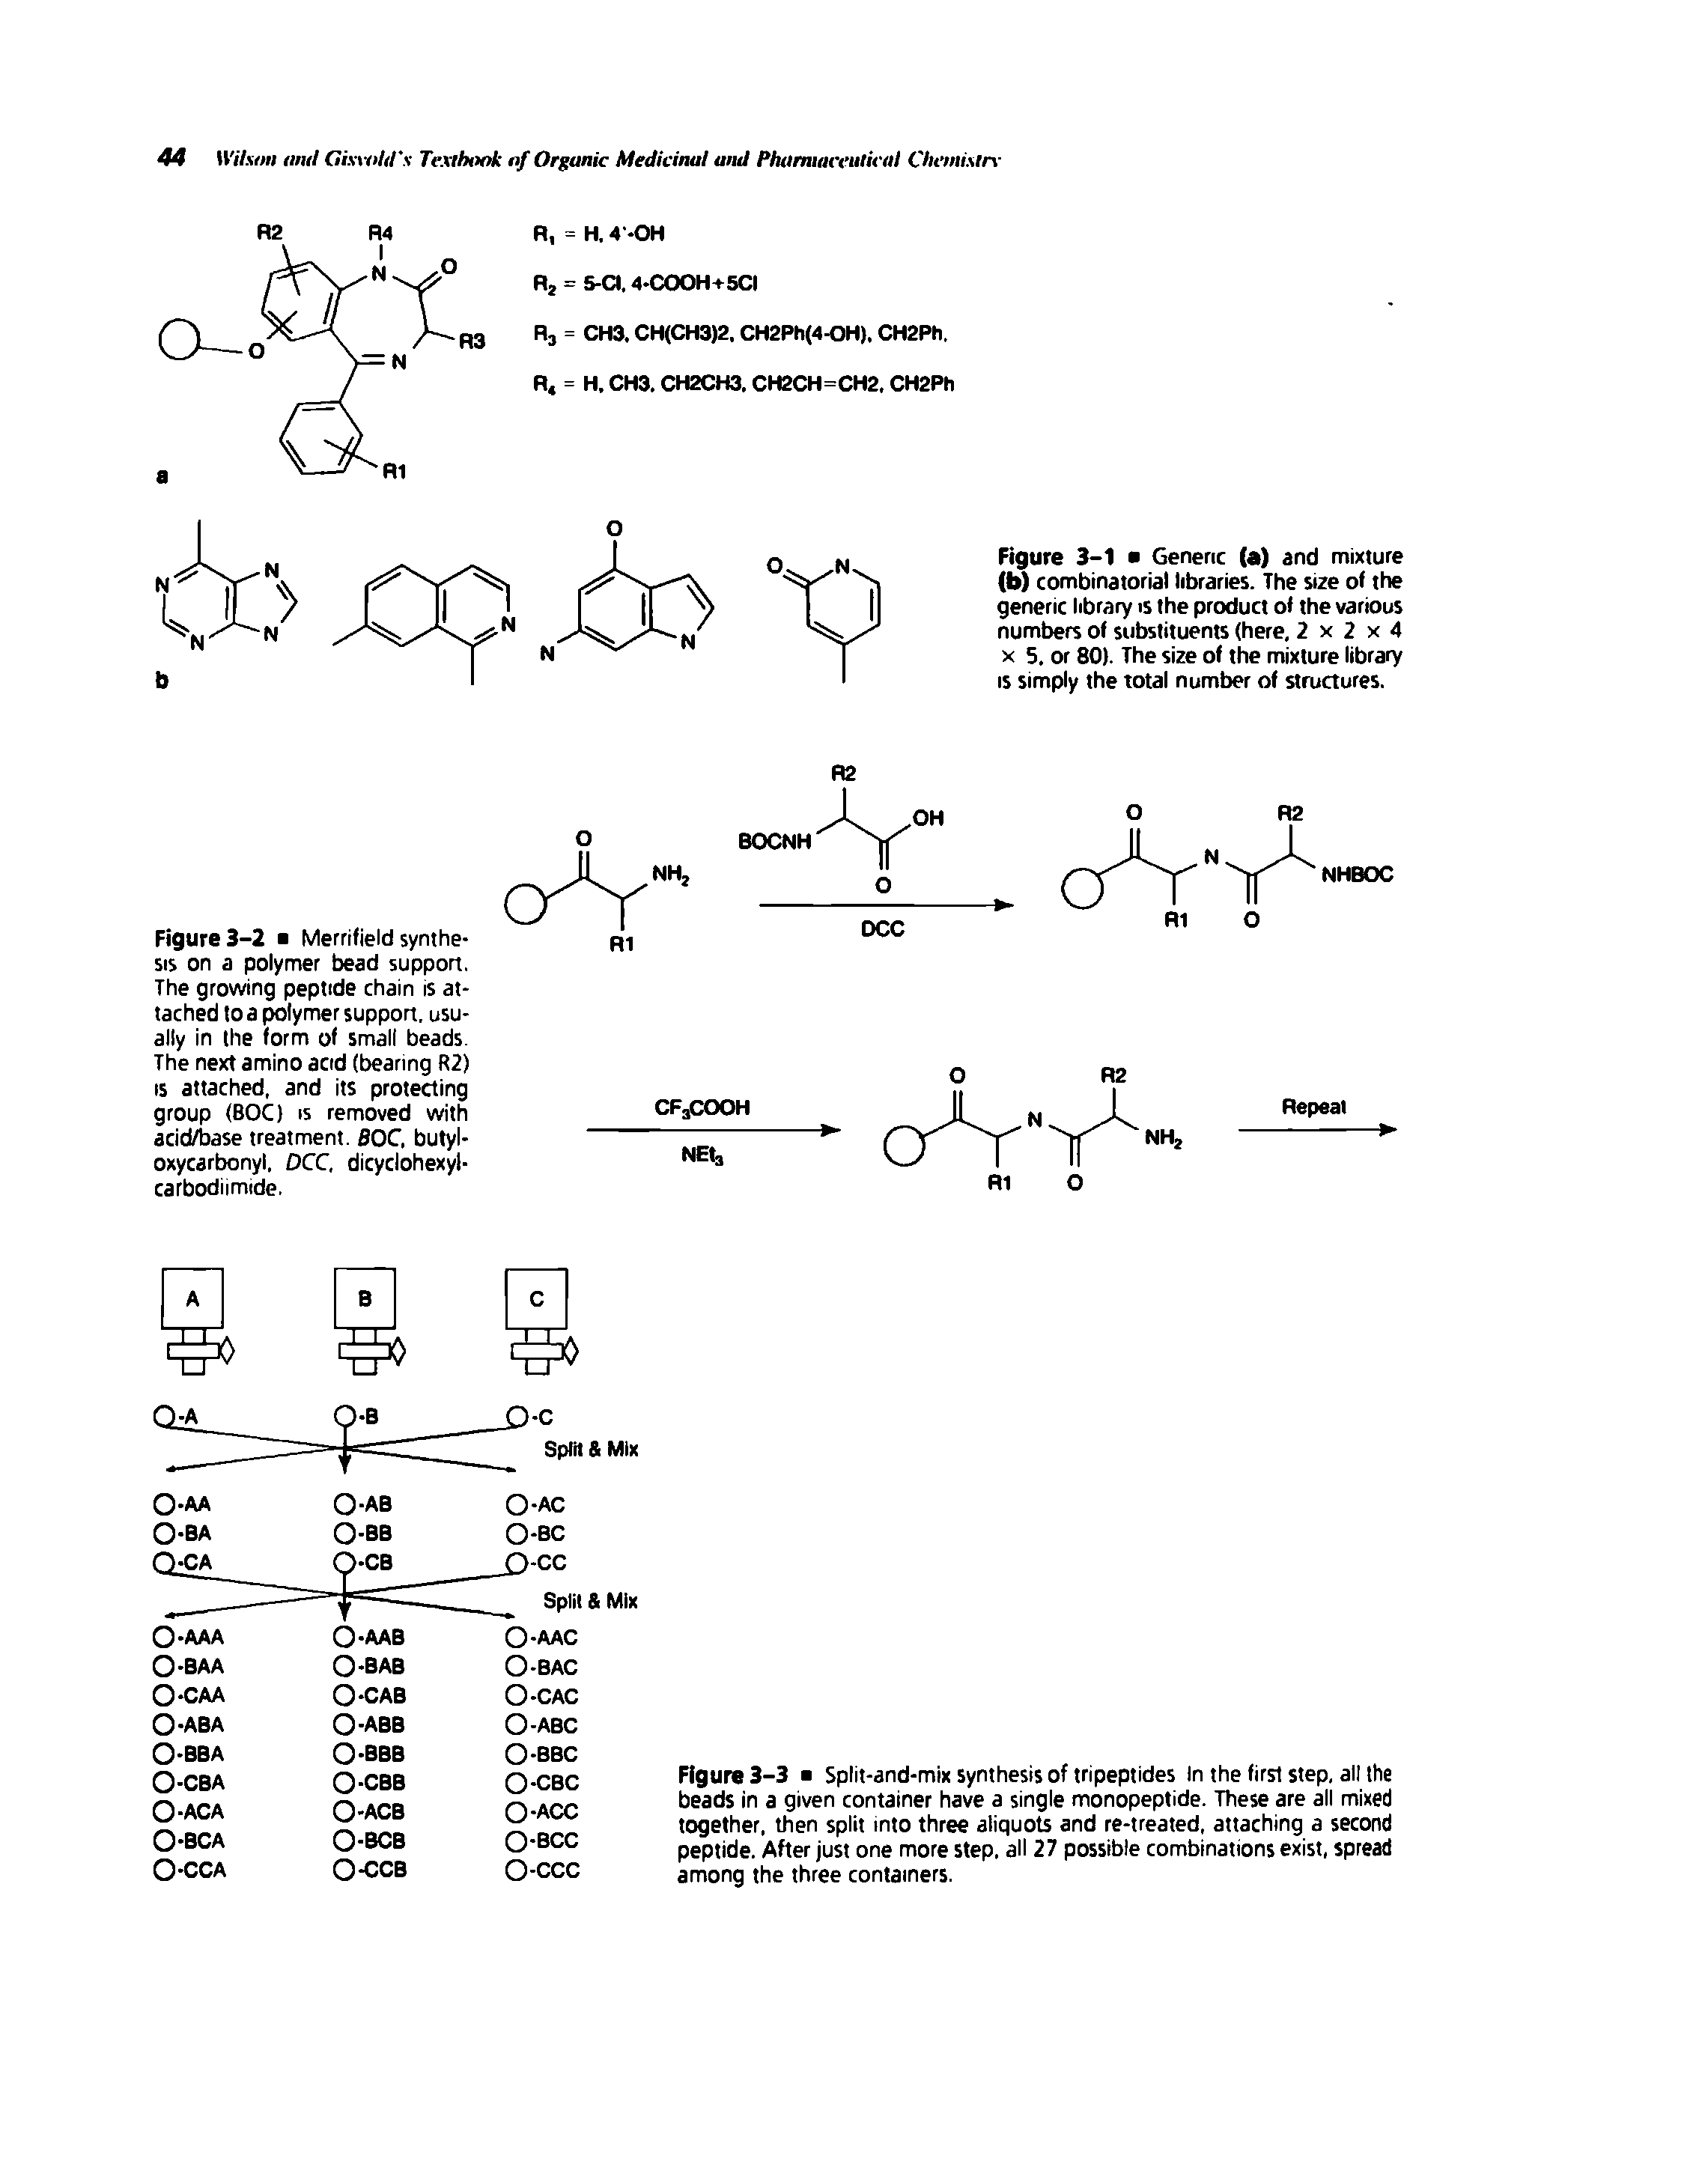 Figure 3-3 Split-and-mix synthesis of tripeptides In the first step, all the beads in a given container have a single monopeptide. These are all mixed together, then split into three aliquots and re-treated, attaching a second peptide. After just one more step, all 27 possible combinations exist, spread among the three containers.